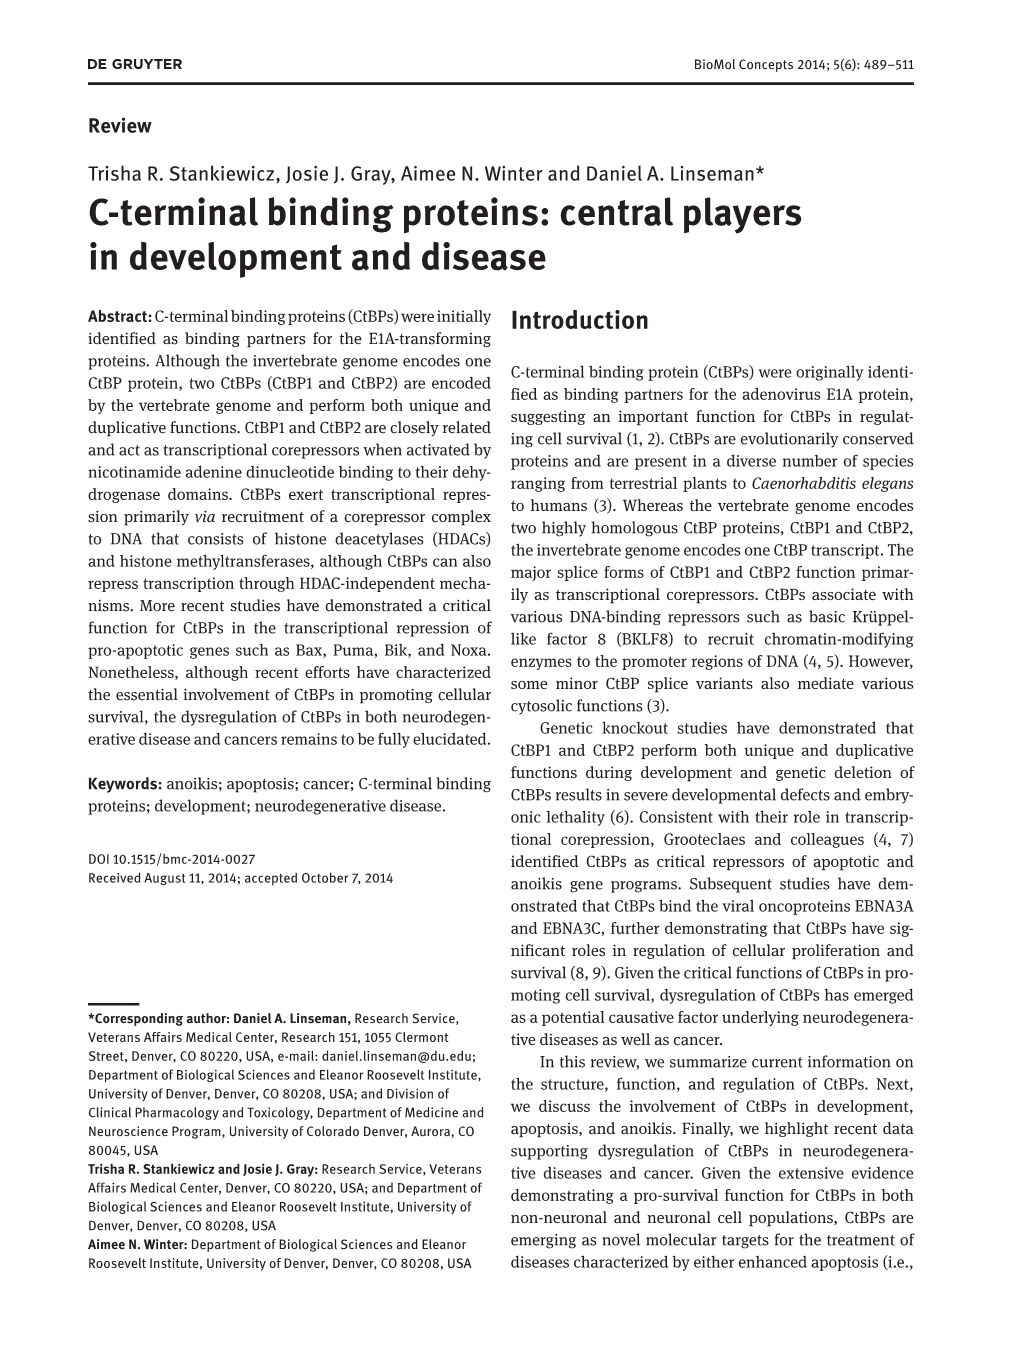 C-Terminal Binding Proteins: Central Players in Development and Disease